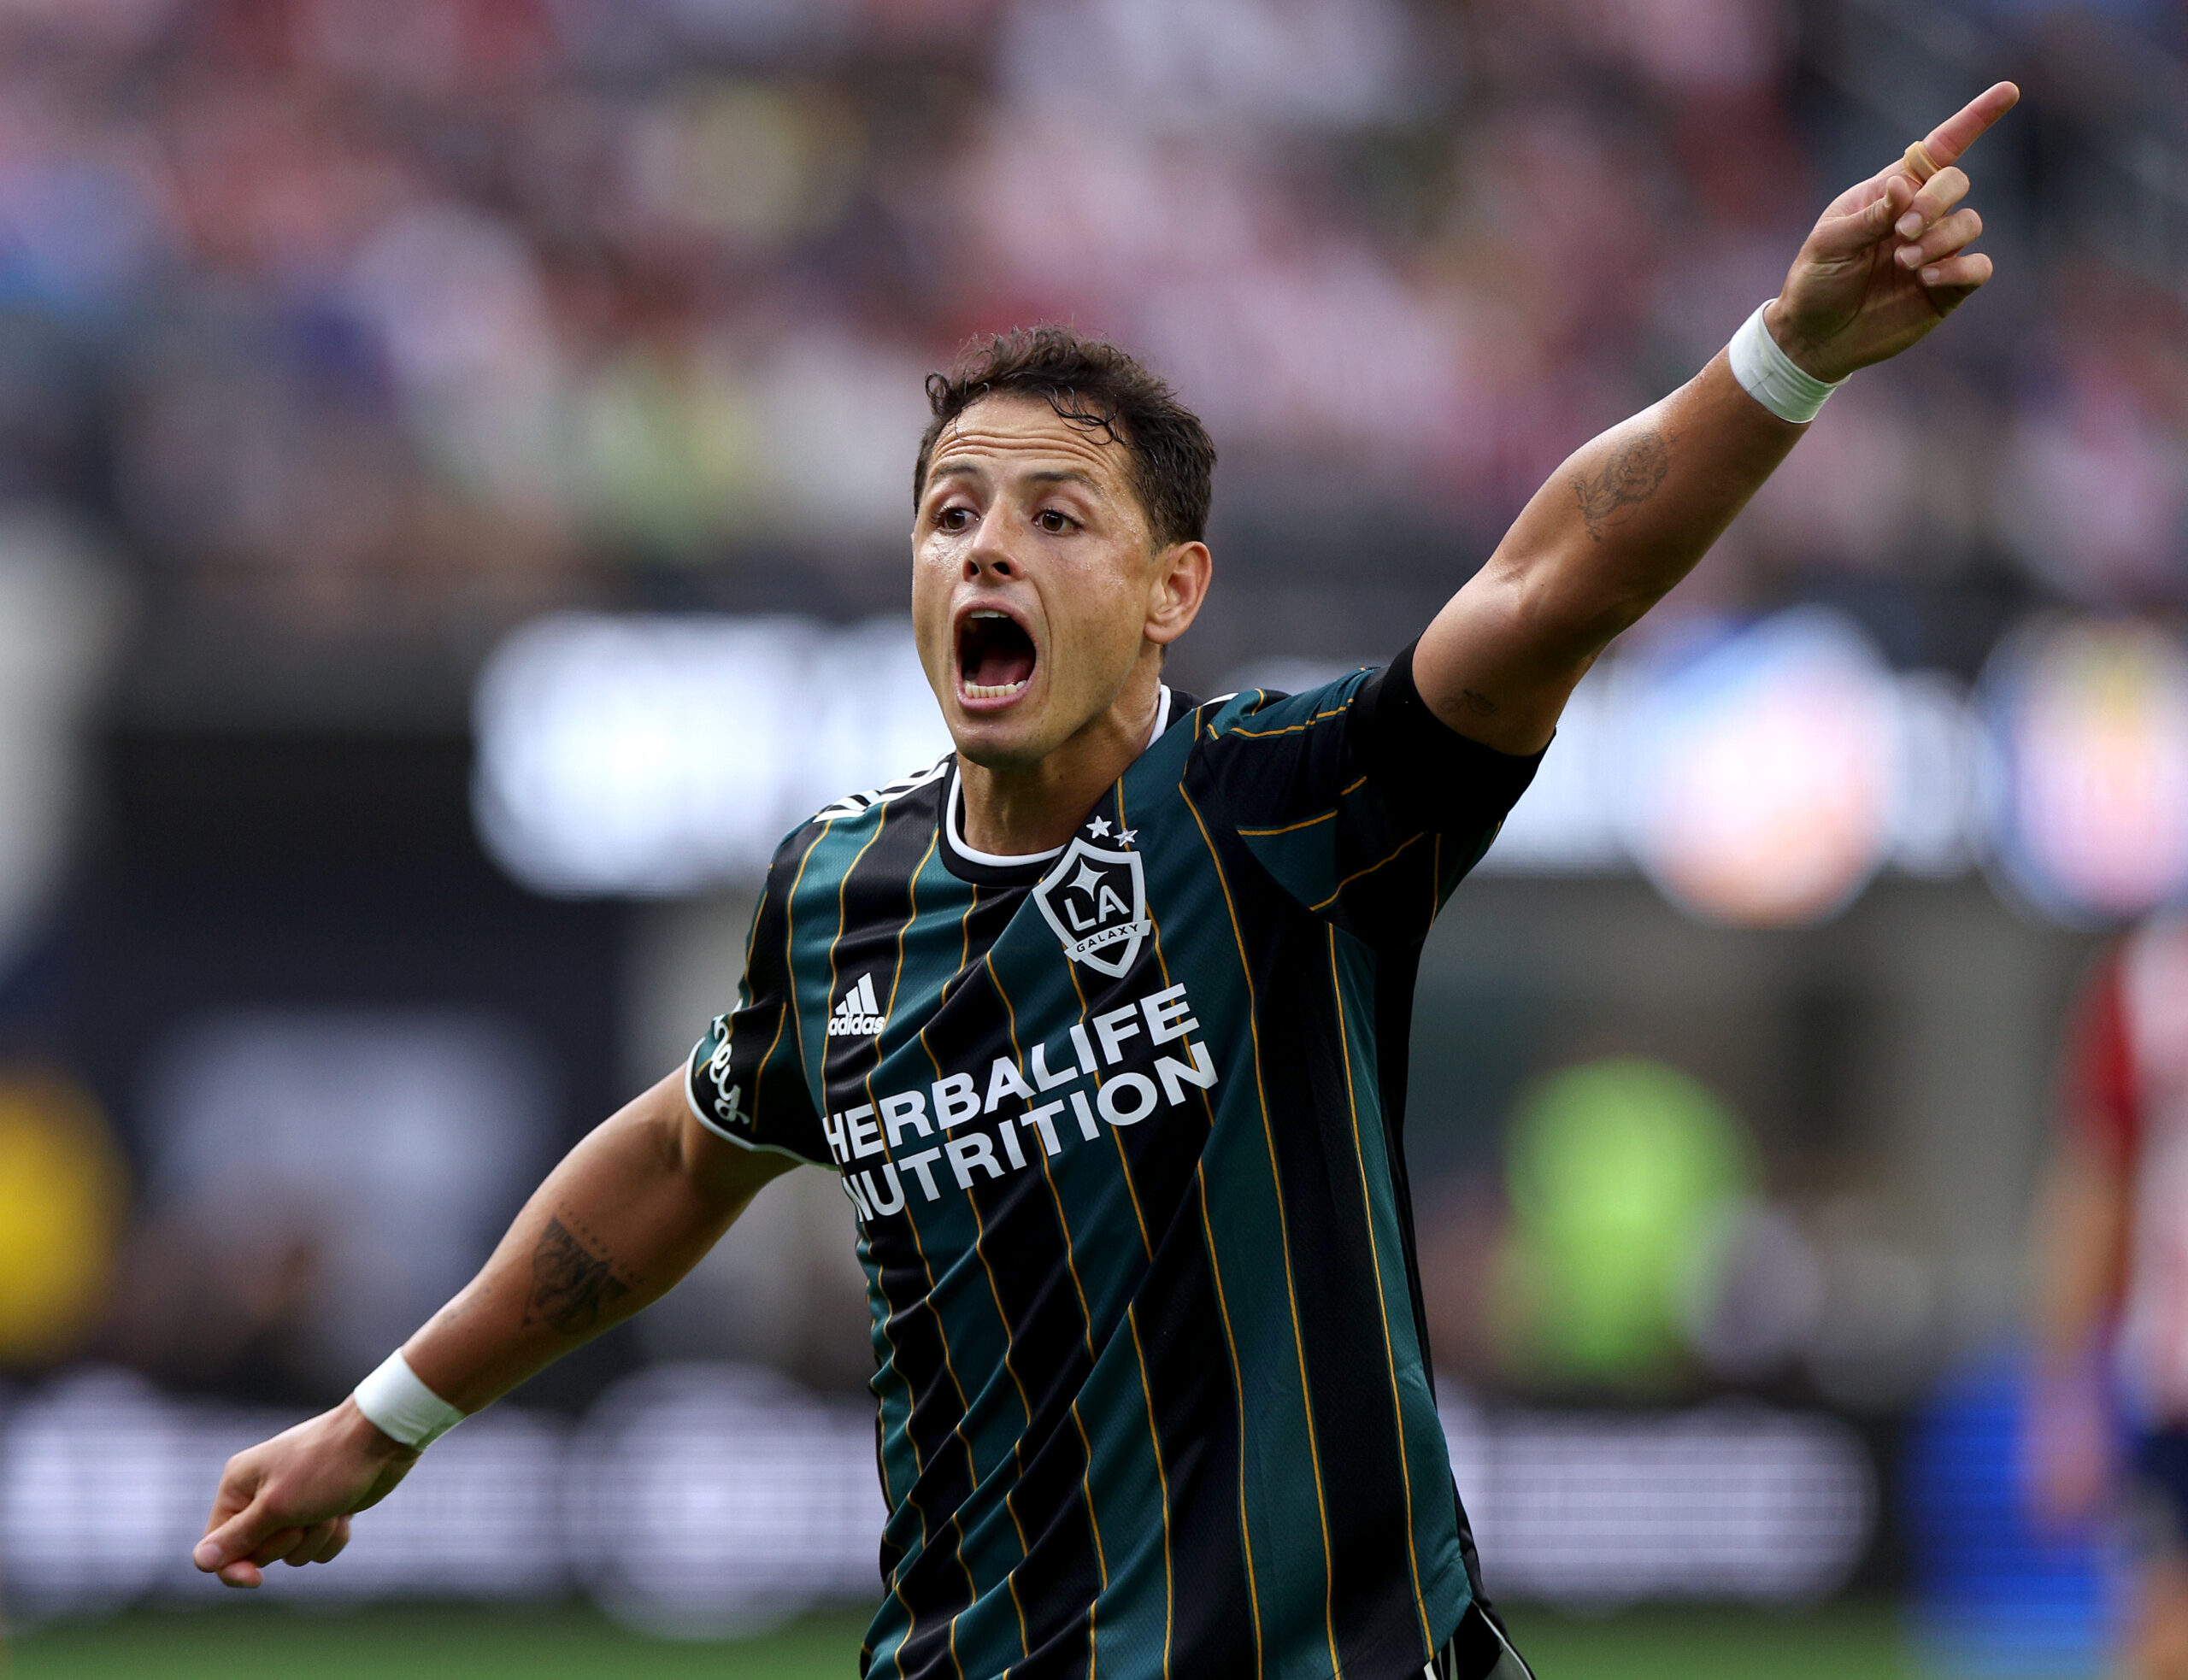 chicharito-hernandez-denies-gignac:-“i-am-not-going-to-sign-with-any-team”